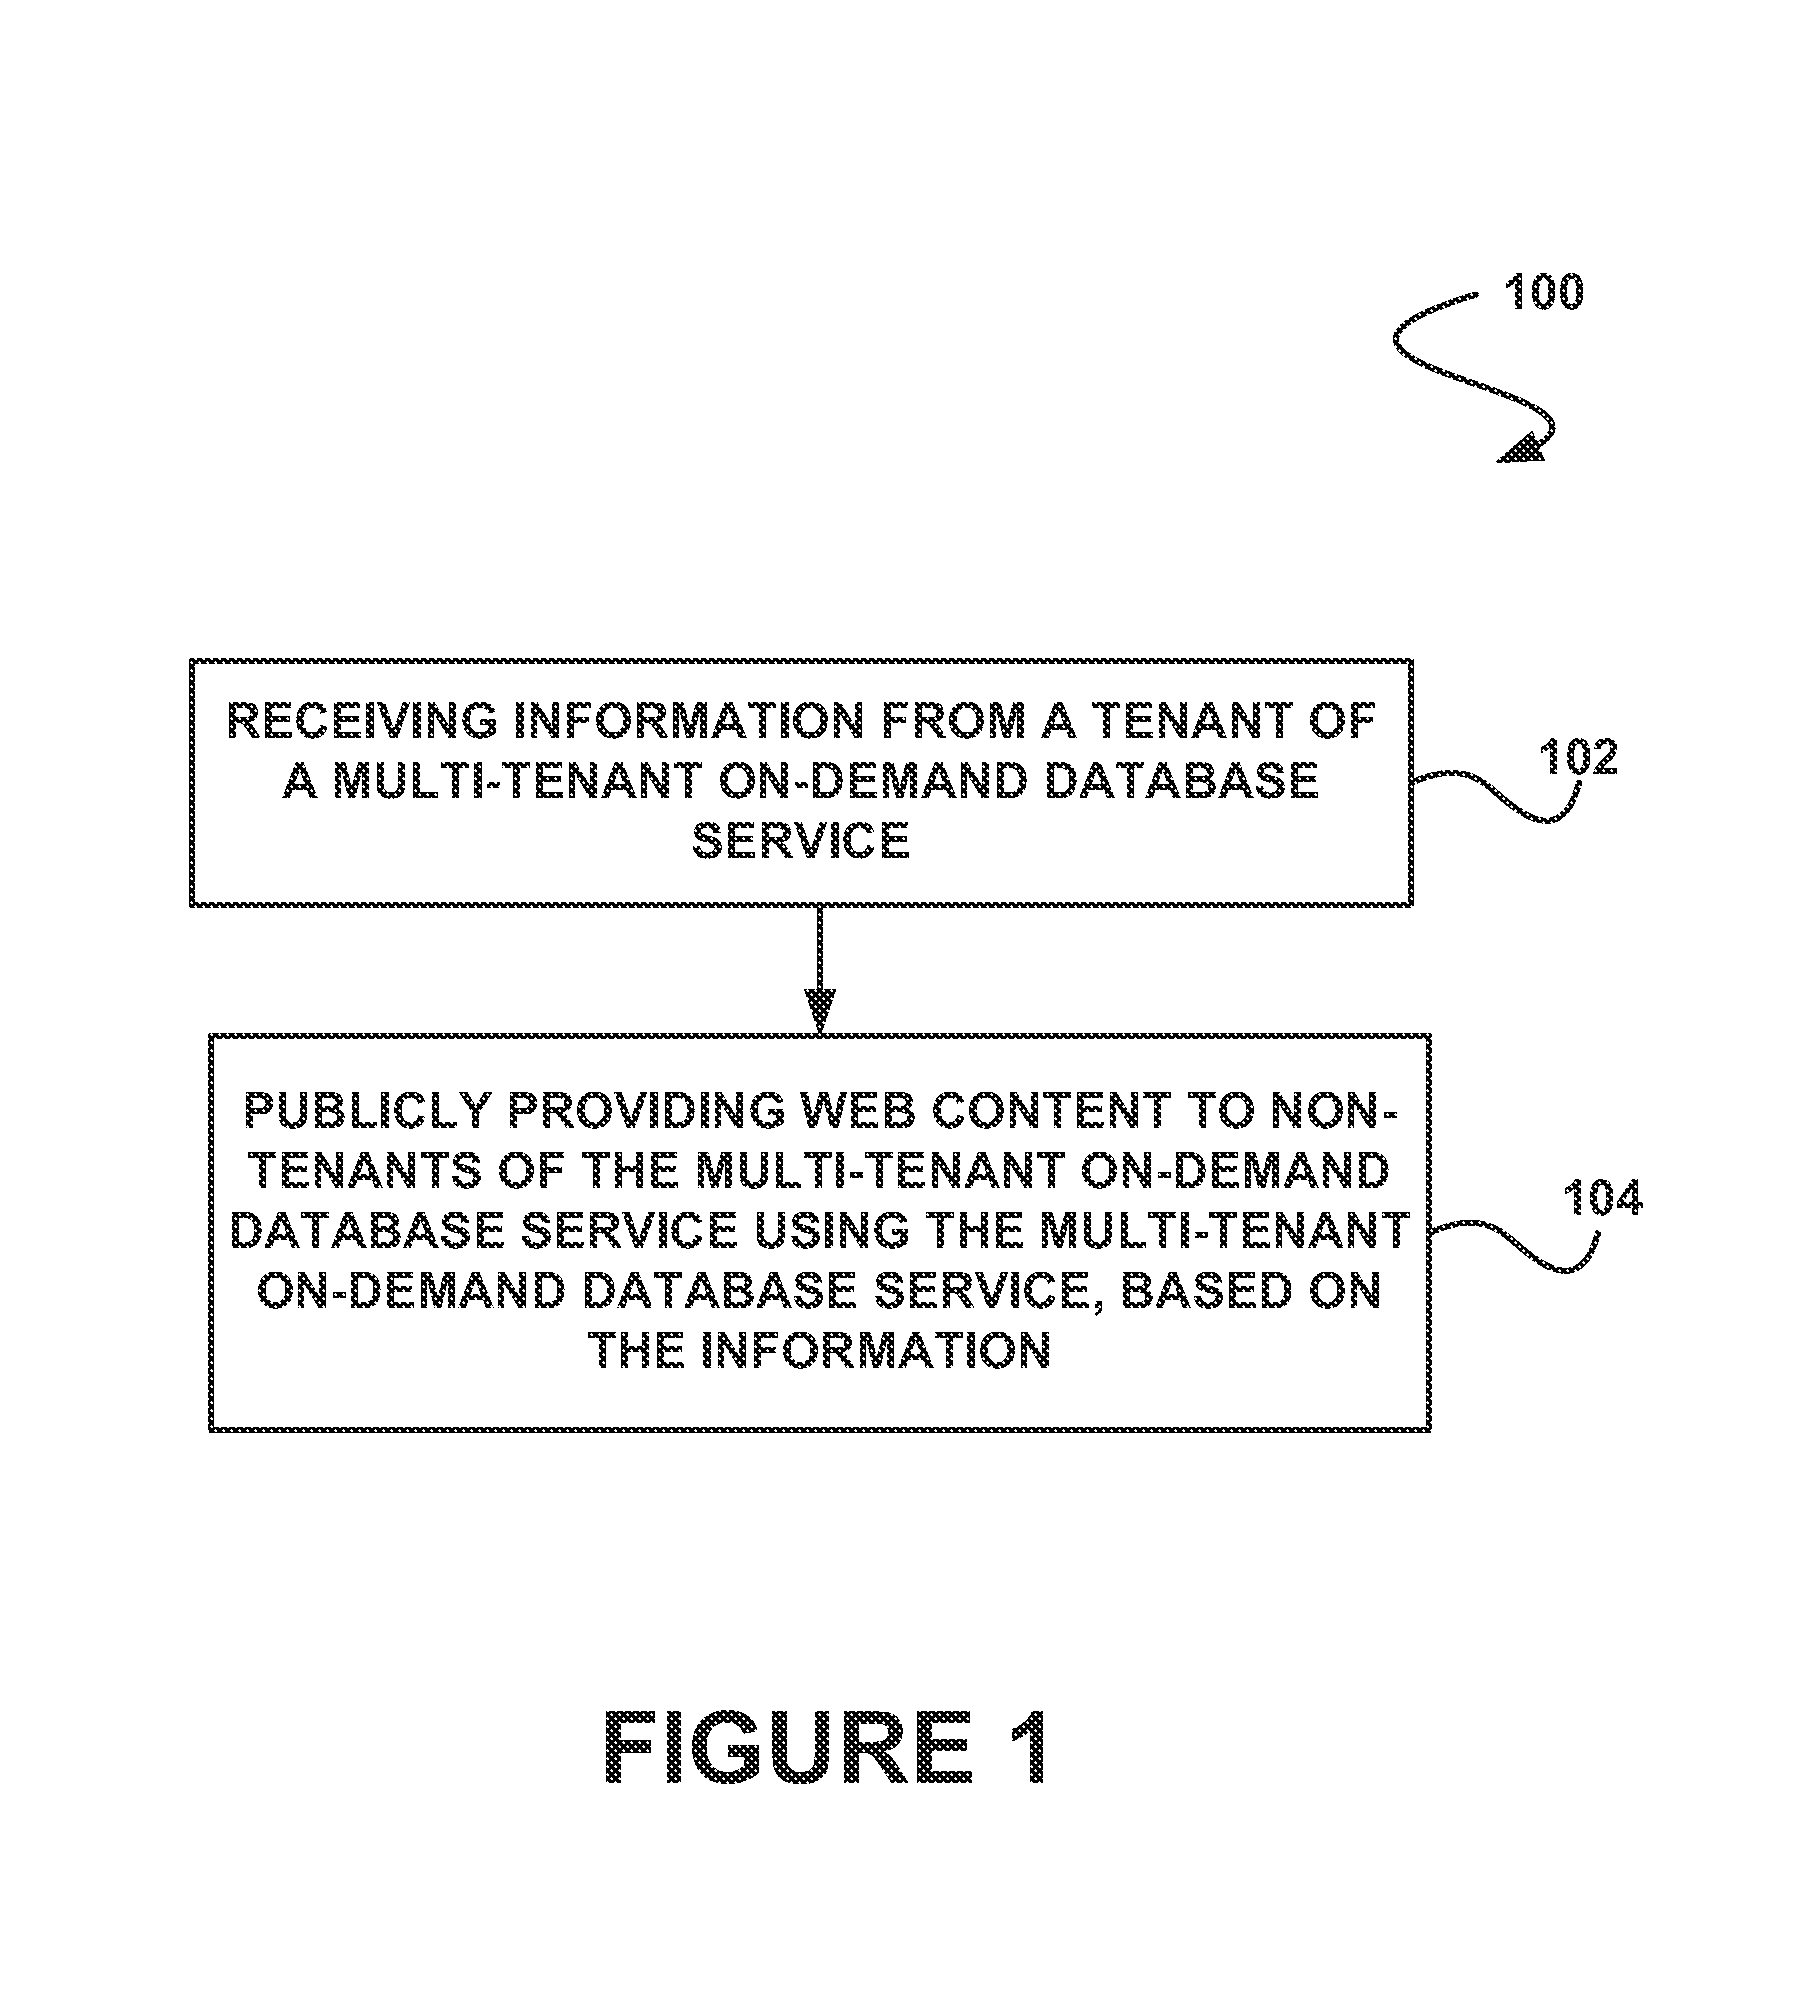 System, method and computer program product for publicly providing web content of a tenant using a multi-tenant on-demand database service